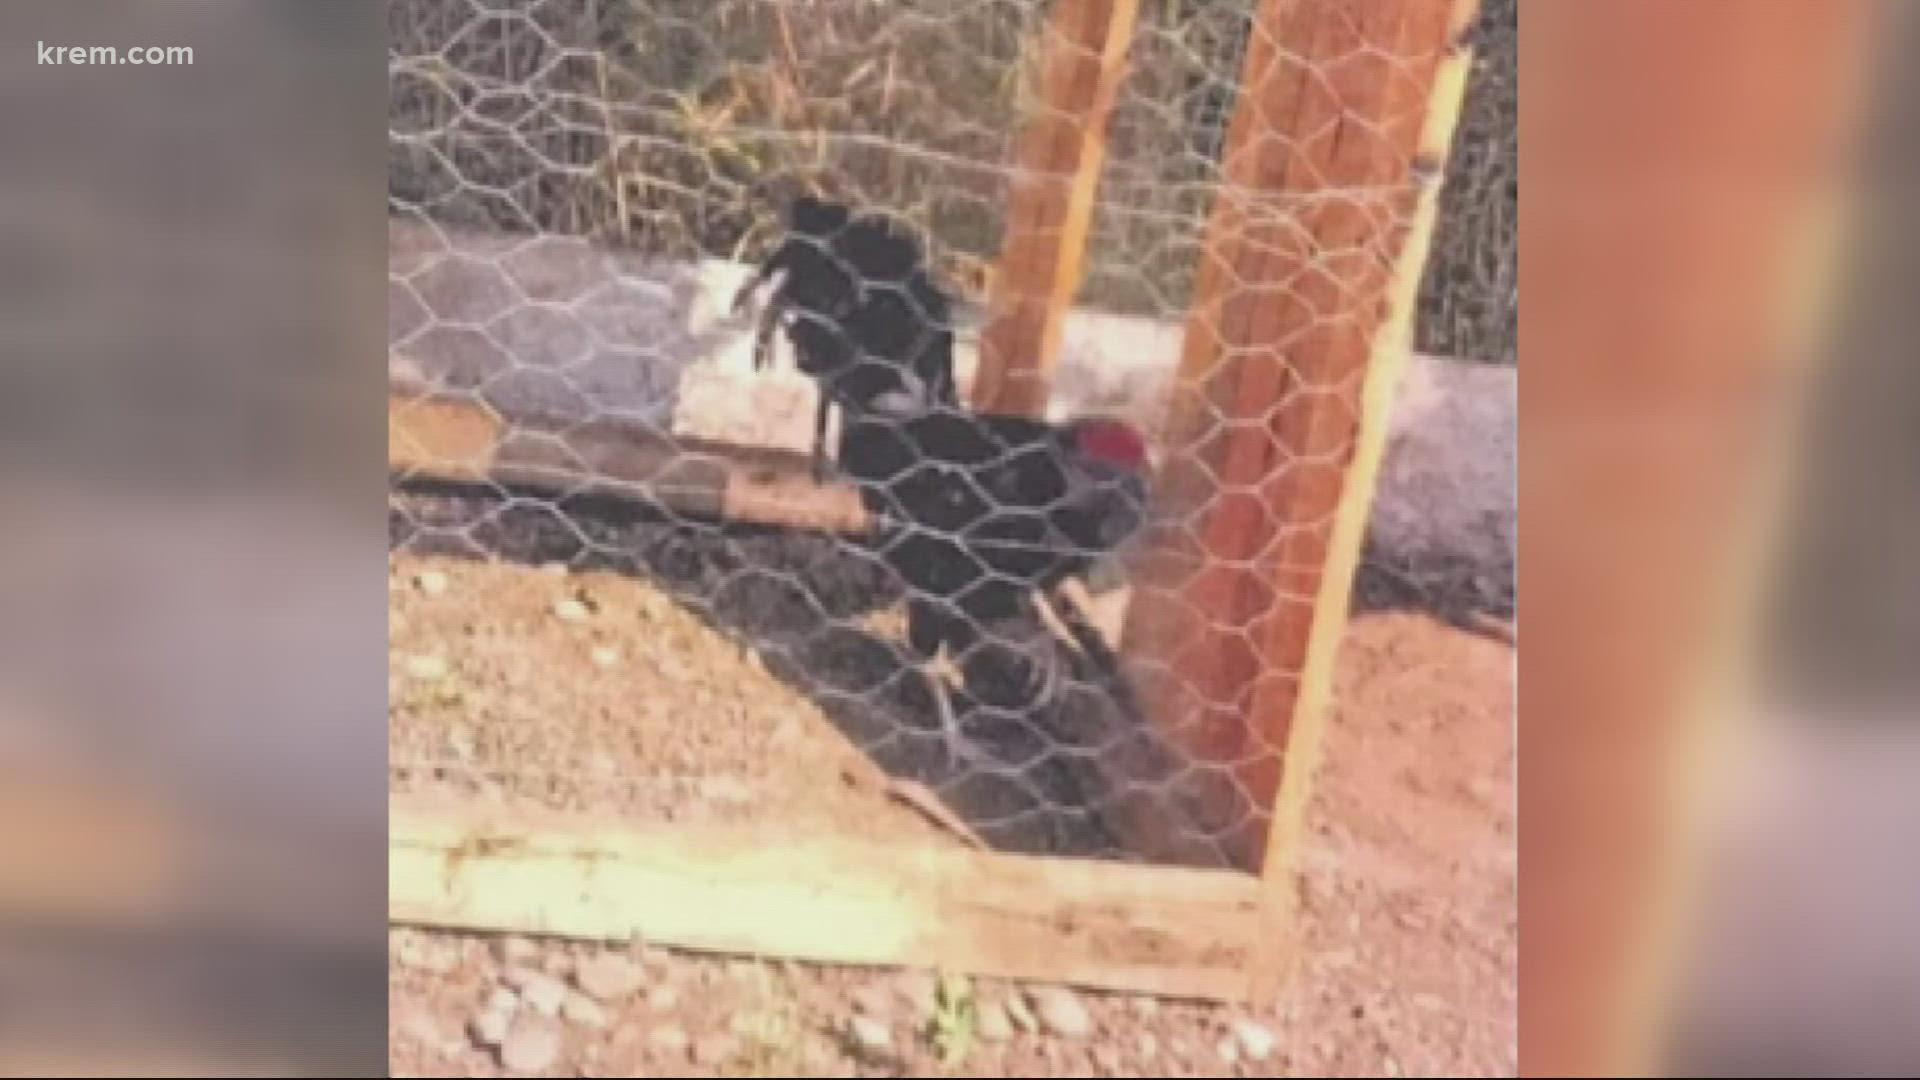 Several roosters were missing combs and wattles and some had their spurs cut, court documents say.